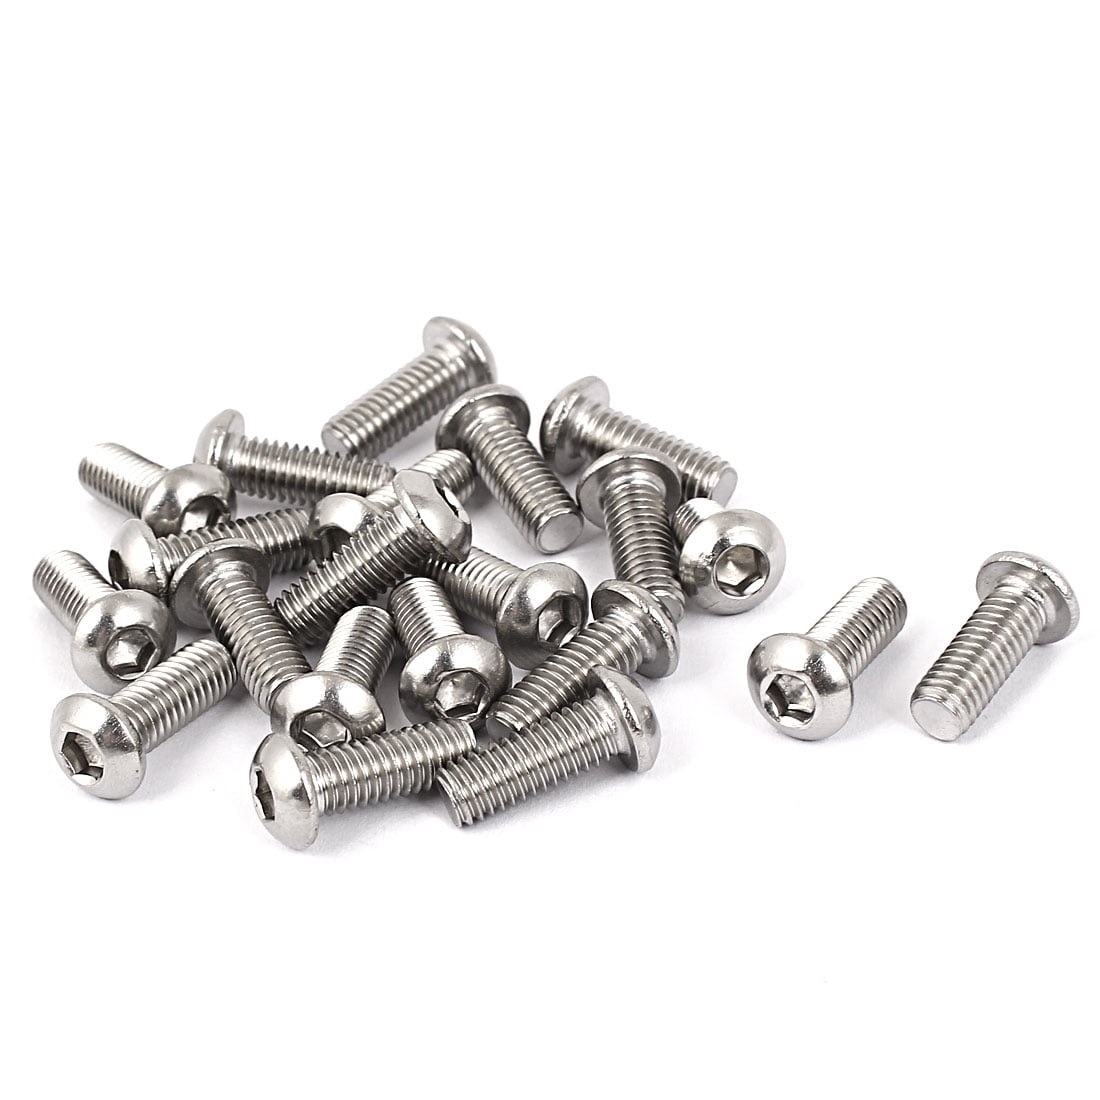 M5x40mm Thread Stainless Steel Wing Bolt Butterfly Screws Fastener 20Pcs 